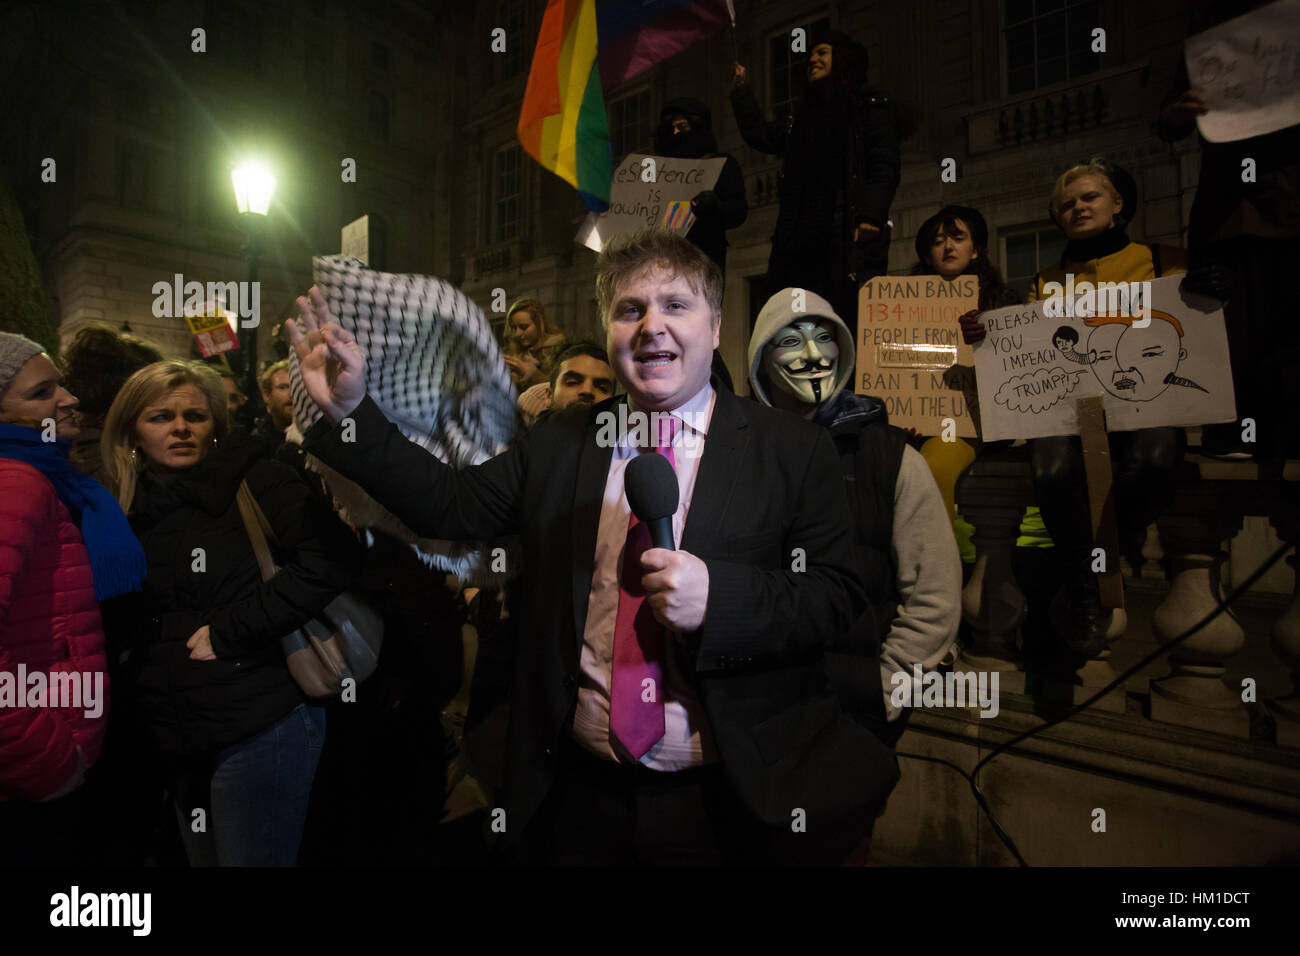 London, UK. 30th Jan, 2017. Political Journalist - Andre Walker voicing his support for Trump to the annoyance of the  surrounding protesters at the Emergency Demo against Trump's Muslim Ban. Credit: Aimvphotography/Alamy Live News Stock Photo